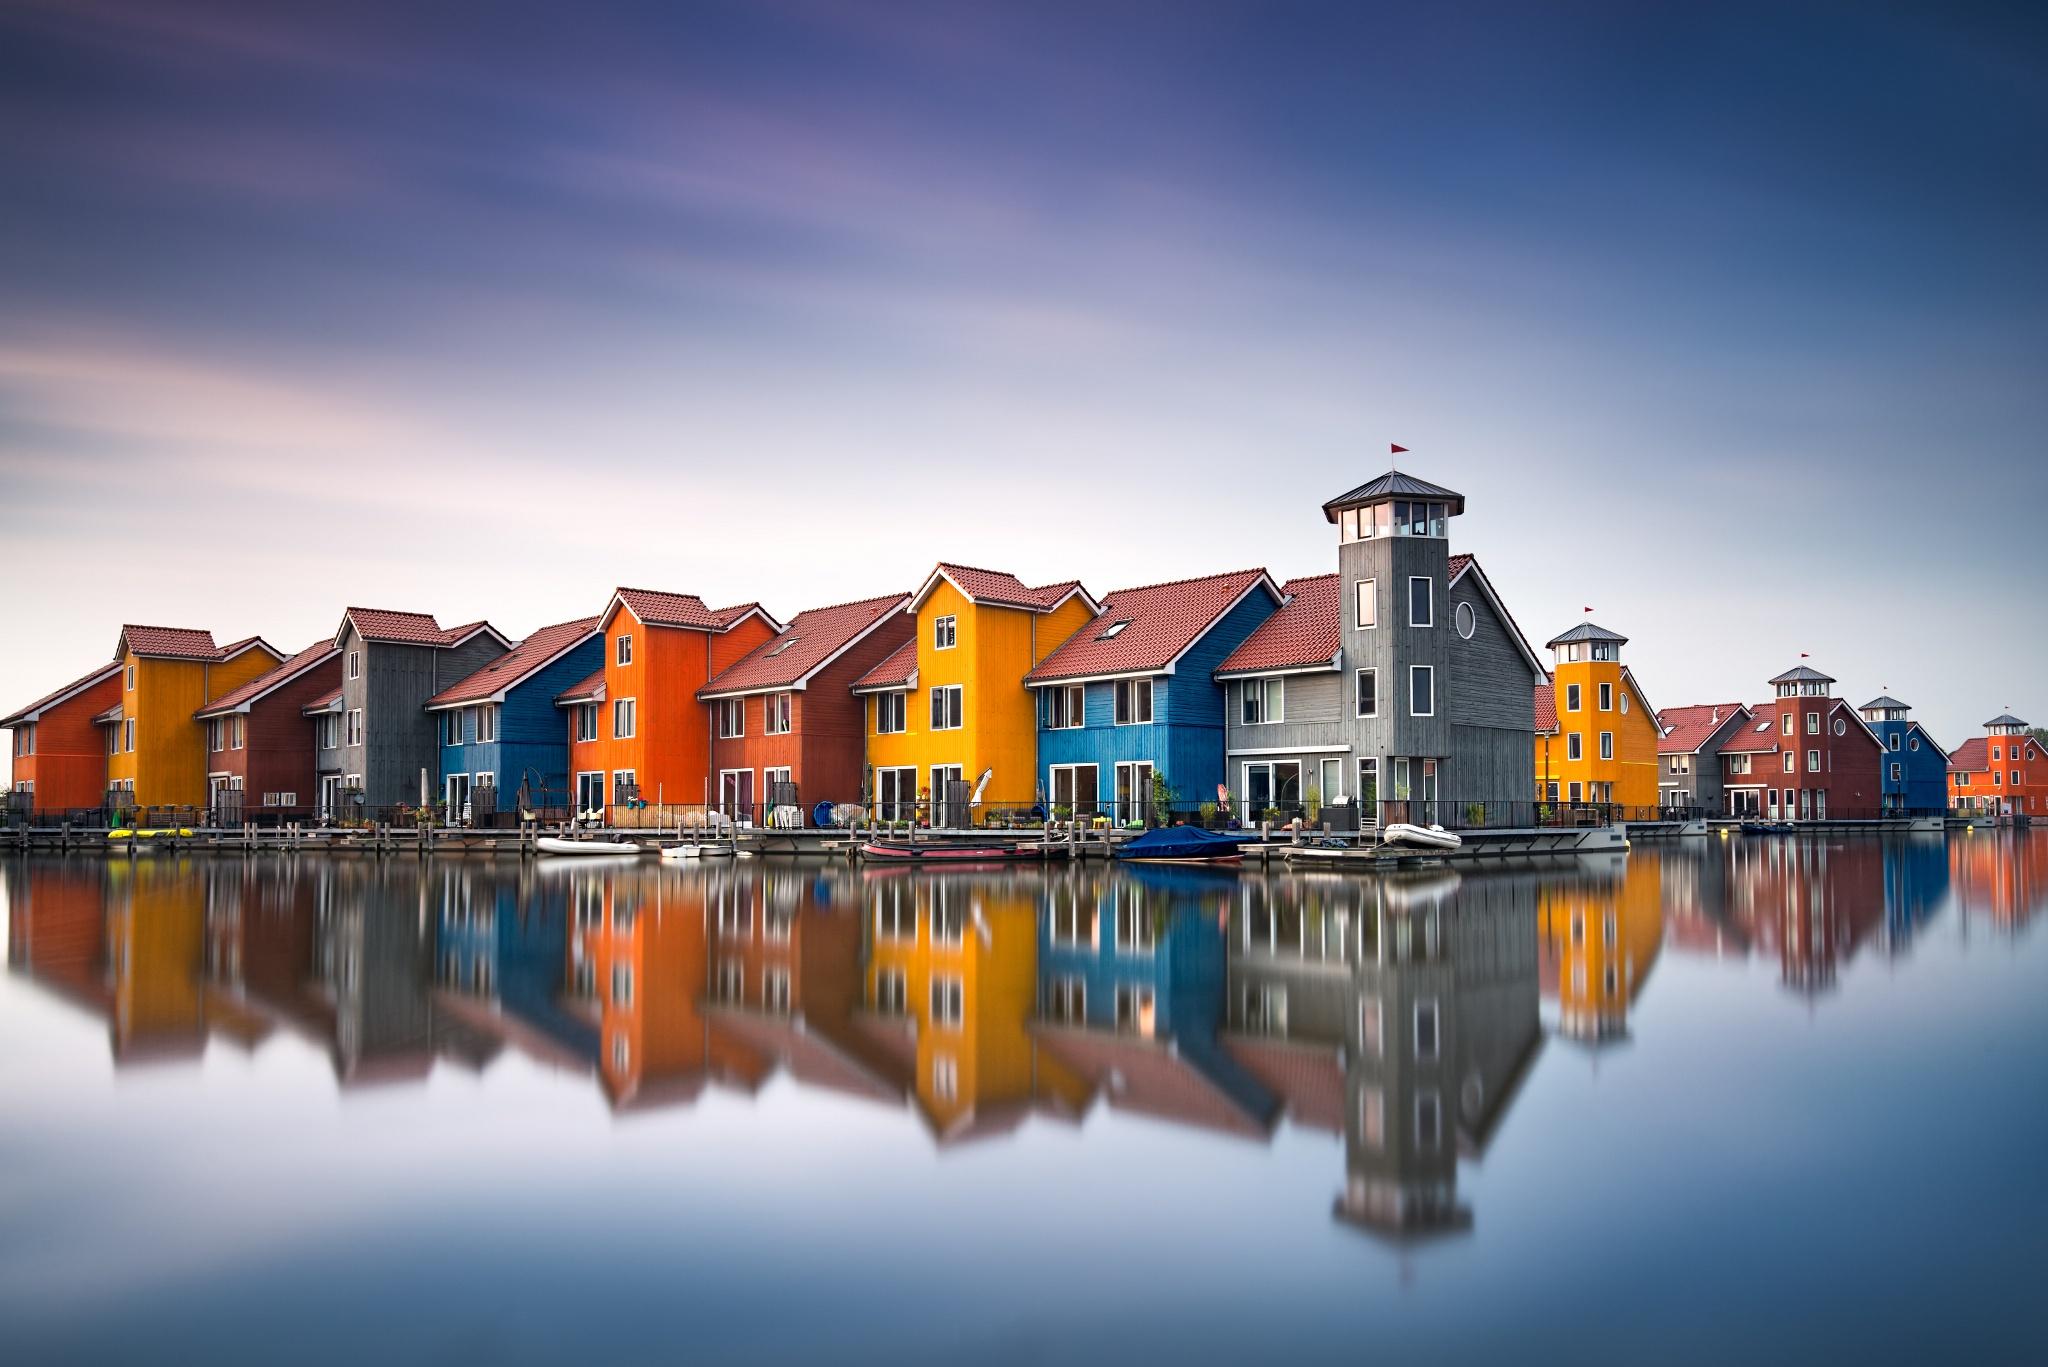 #Dutch, #reflection, #boat, #water, #colorful, #house